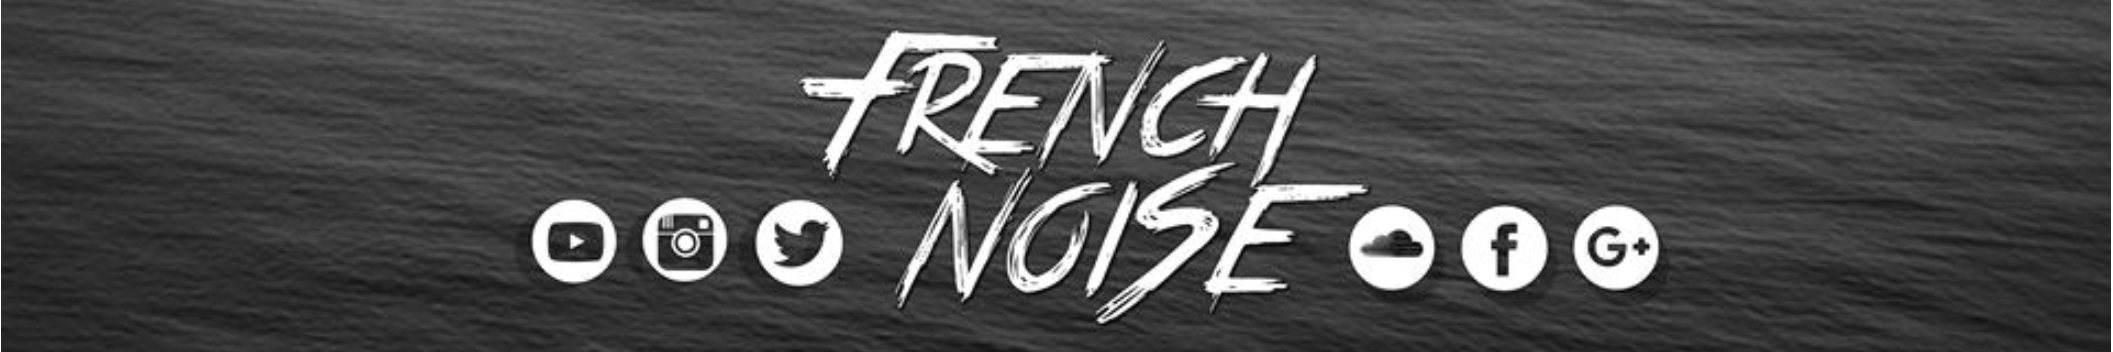 FRENCH NOISE